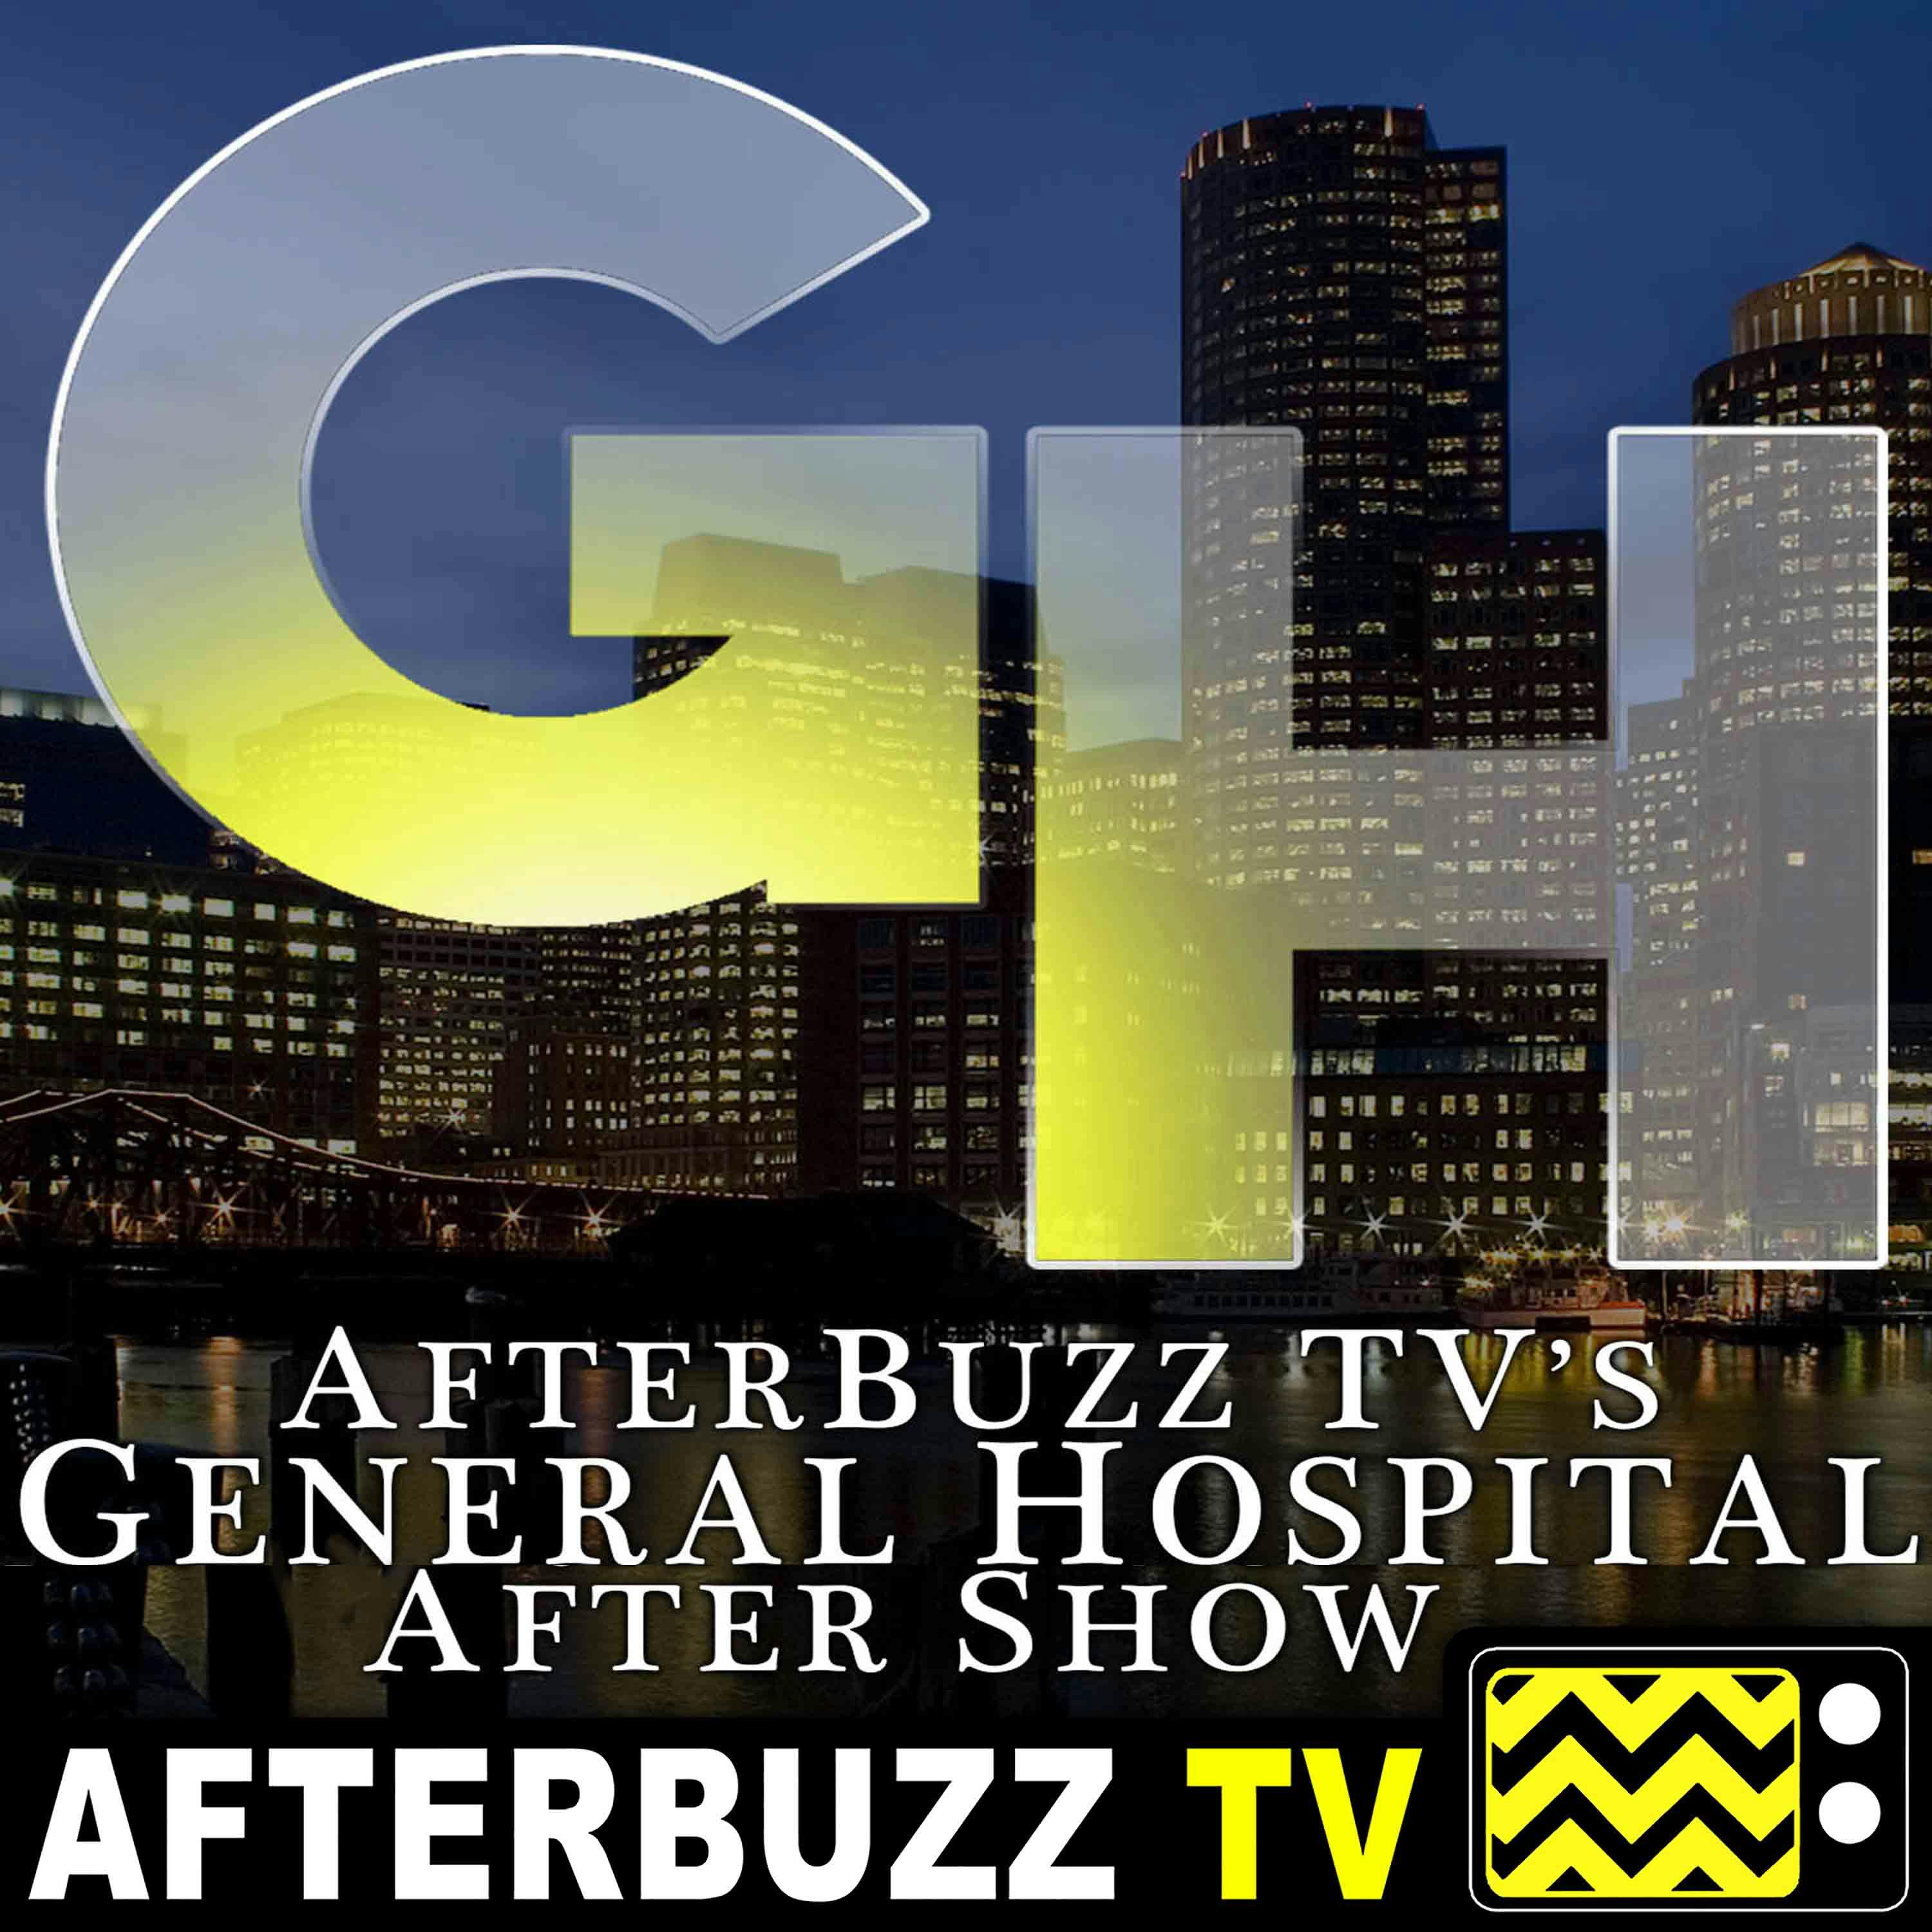 ’April 29th - May 3rd, 2019’ Review Of General Hospital